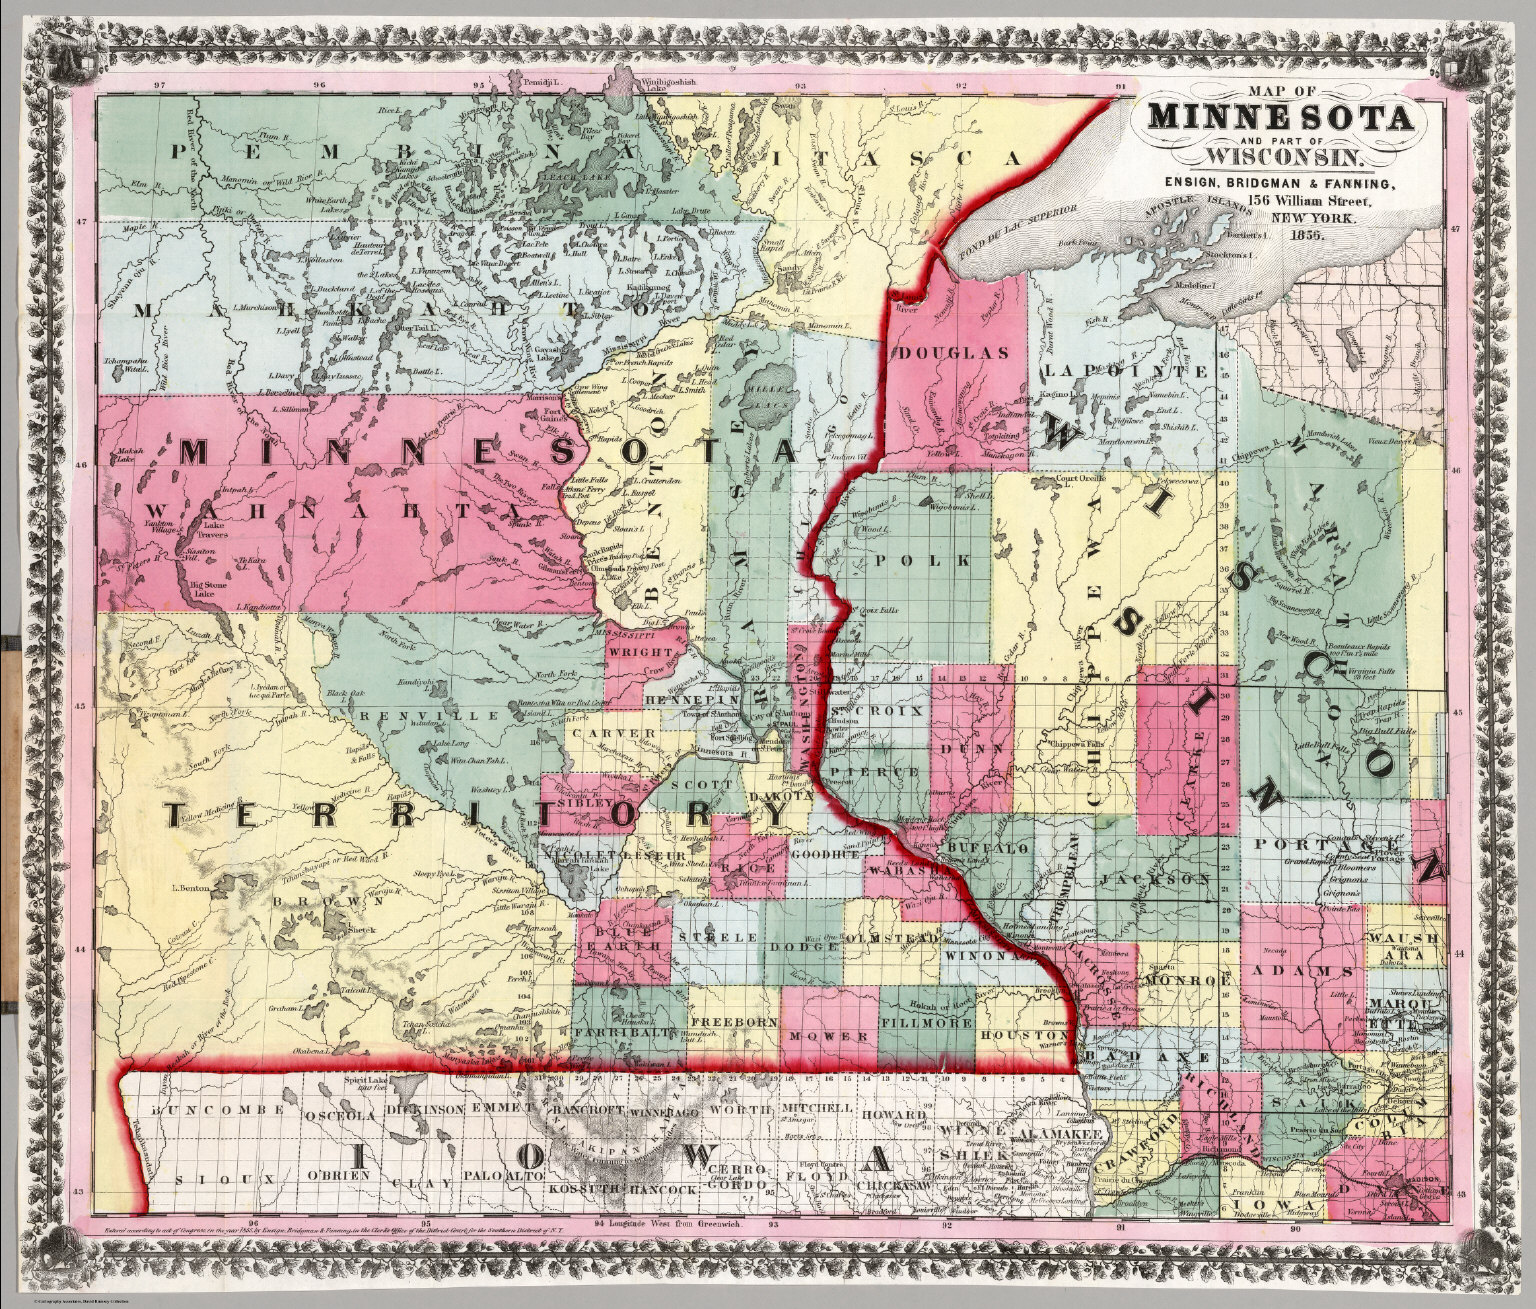 Map Of Minnesota And Part Of Wisconsin. - David Rumsey Historical Map